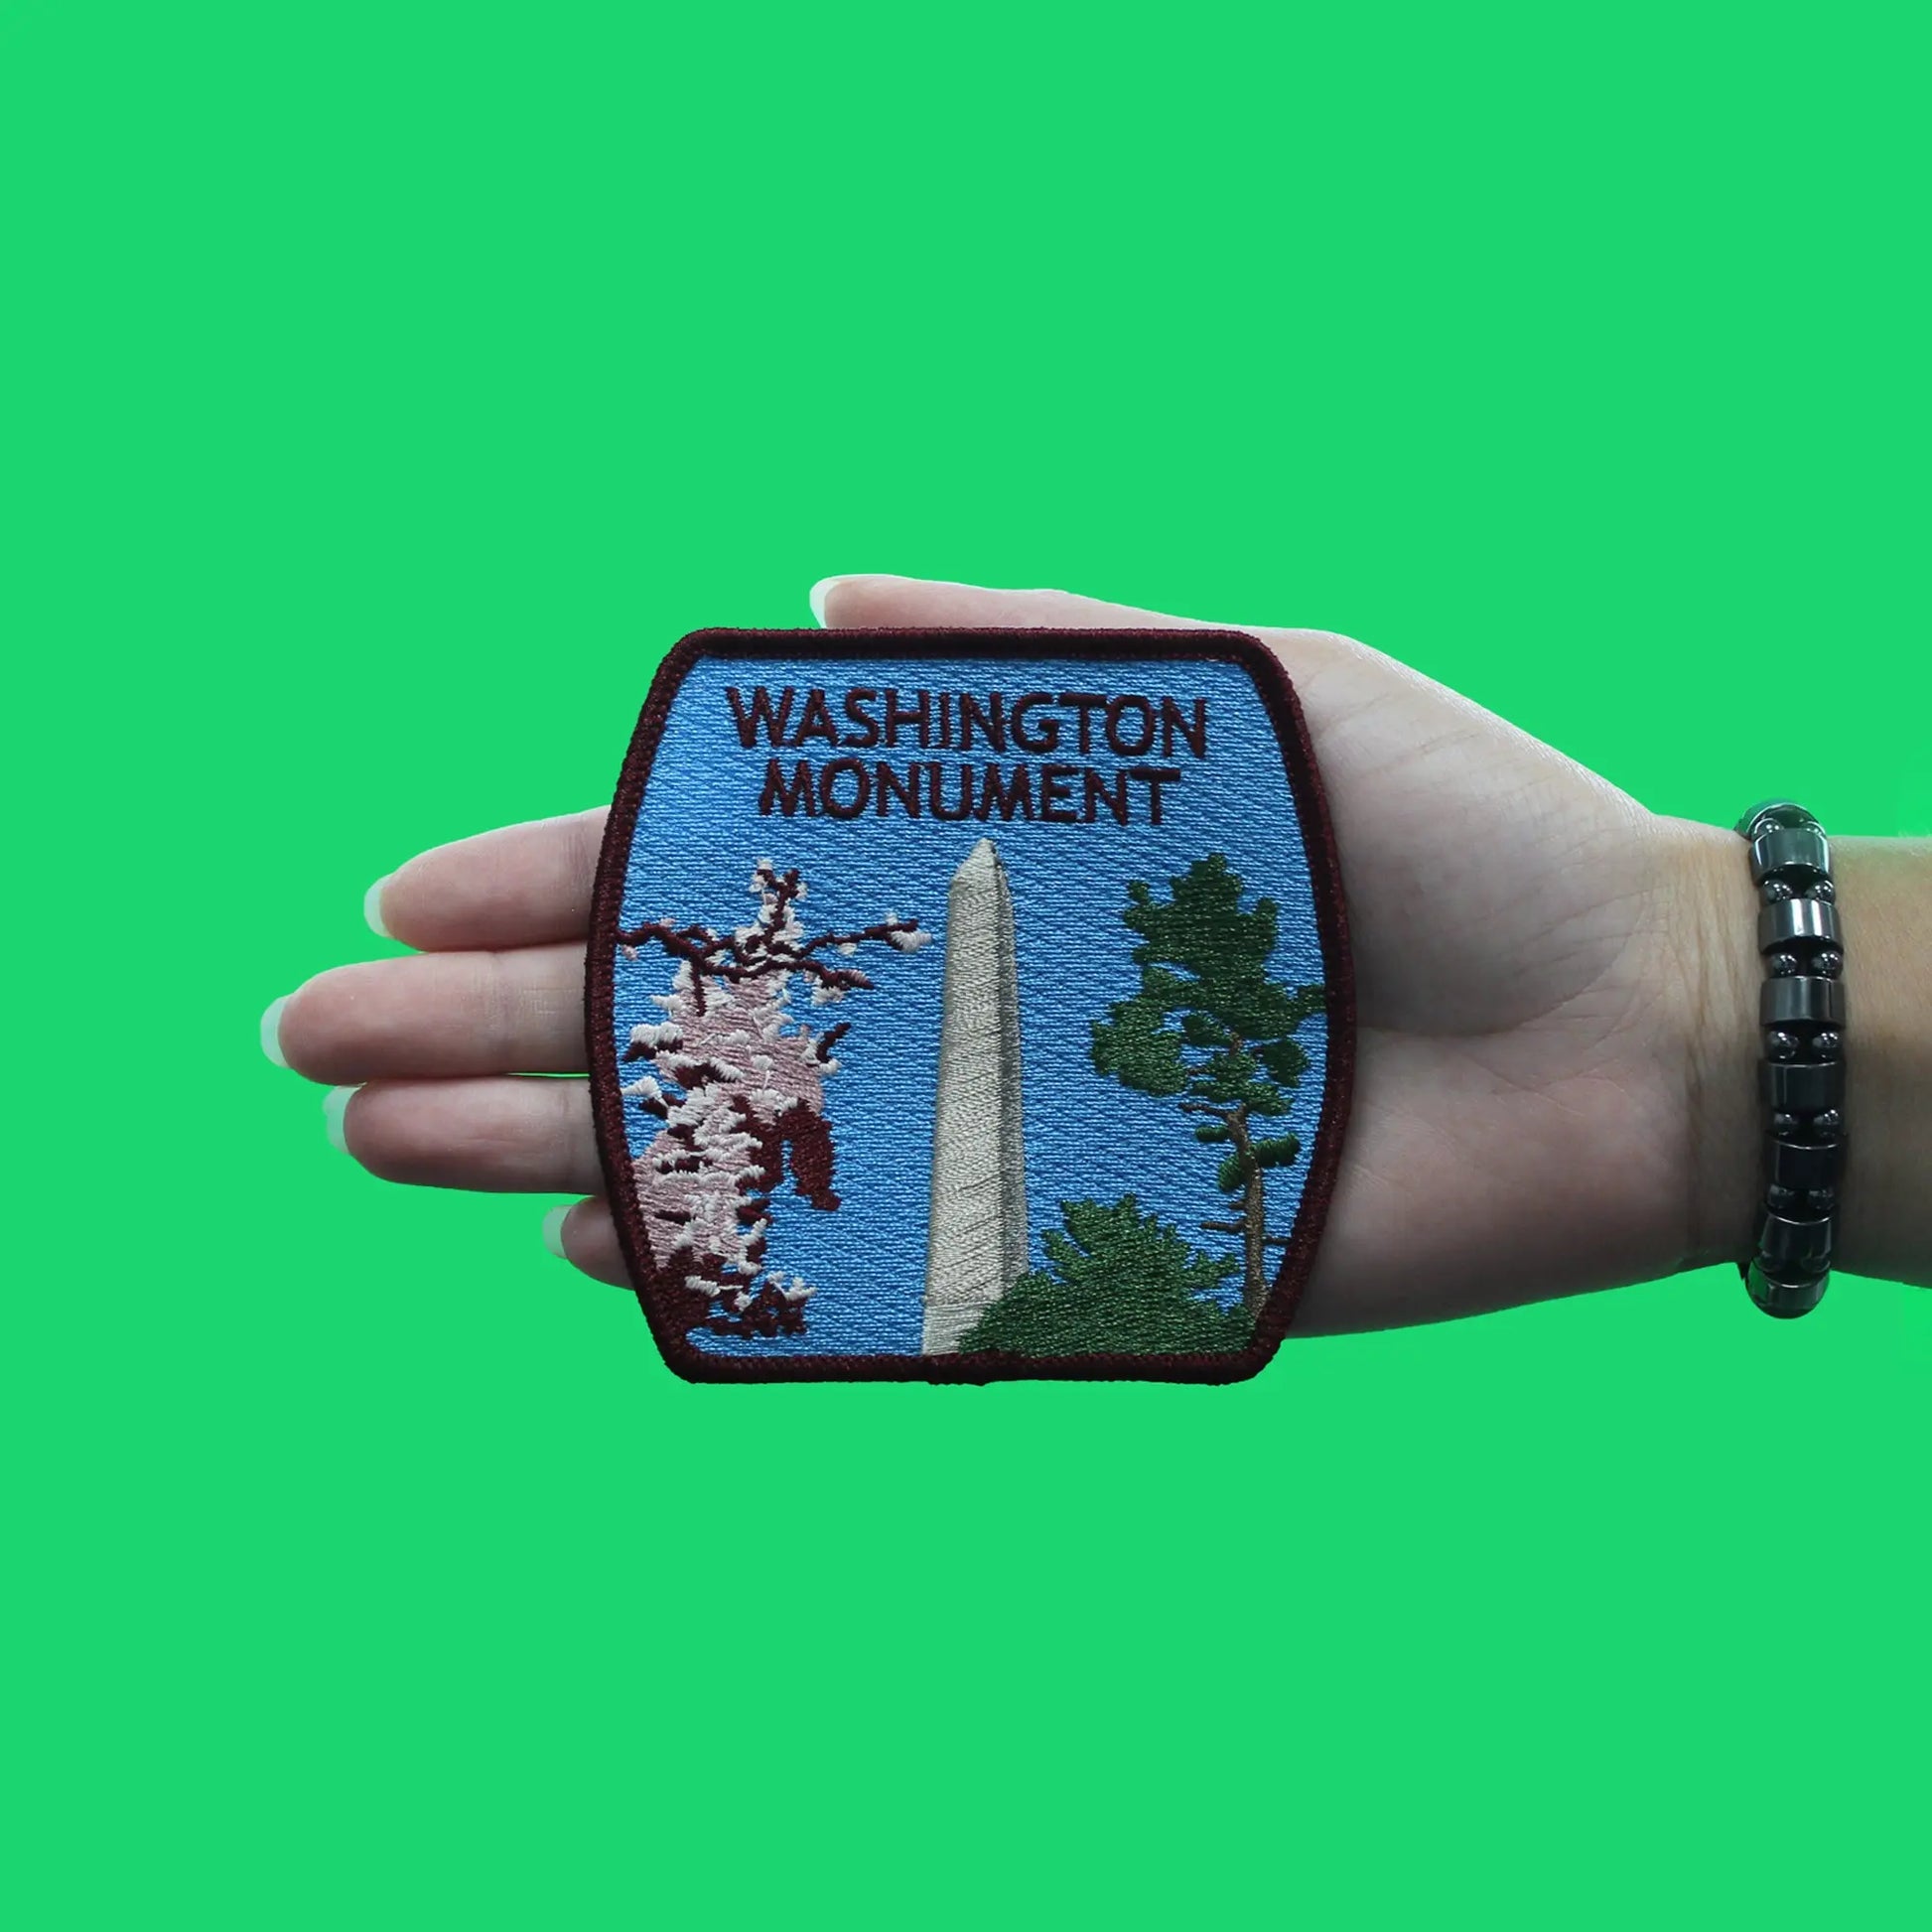 Washington Monument Memorial Patch National Mall DC Travel Embroidered Iron On